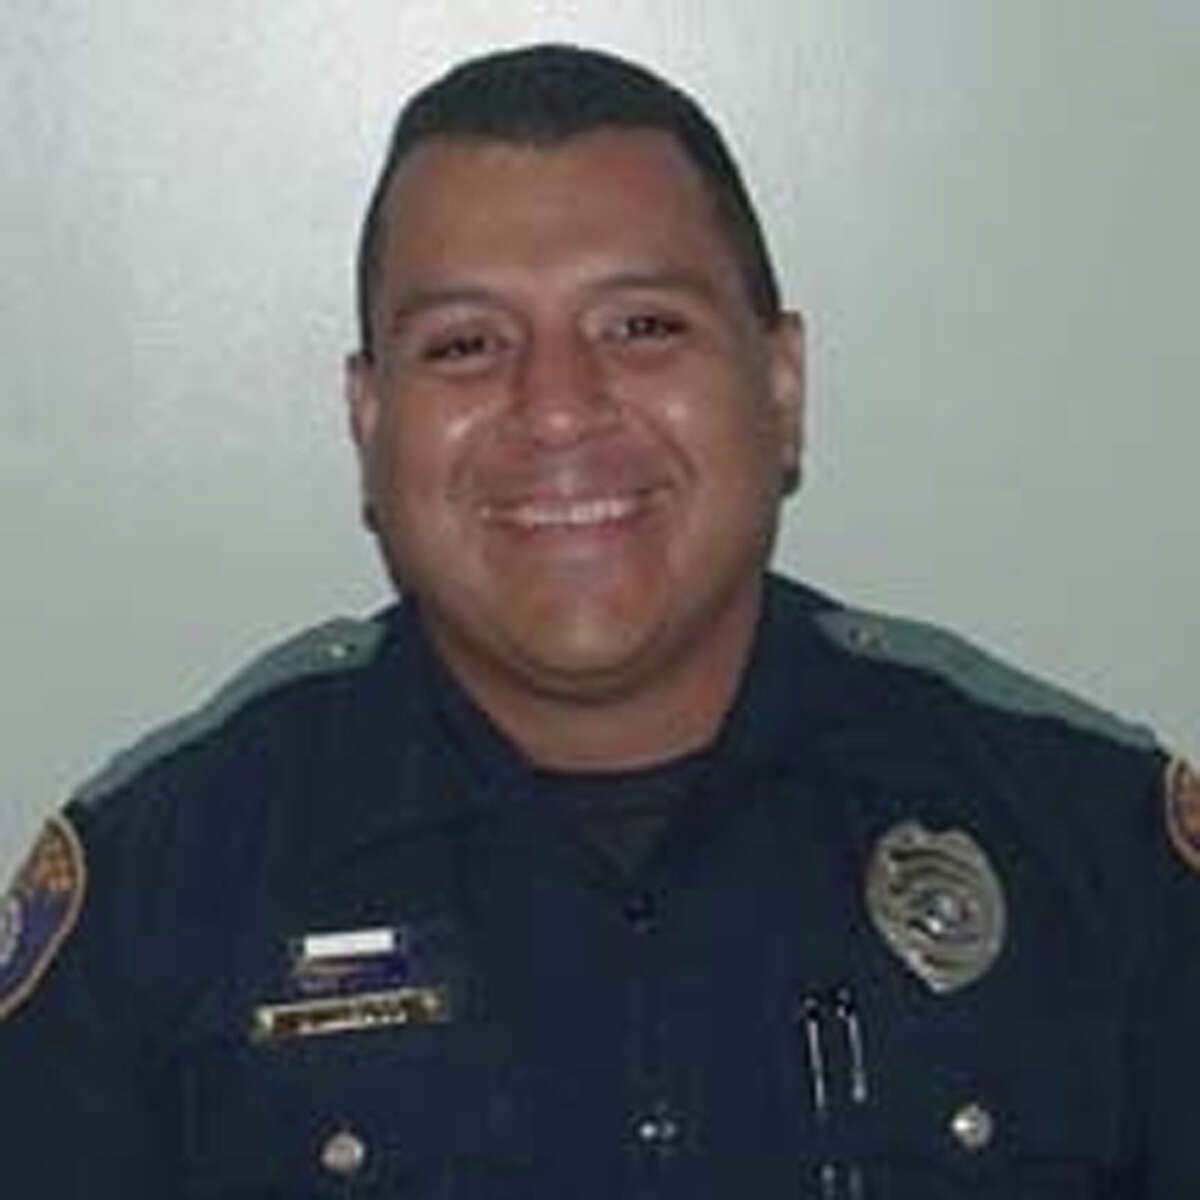 THE OFFICER: Northside Independent School District Police Officer Daniel Alvarado shot and killed a student in the backyard of a house the youth had run to in order to avoid detection.